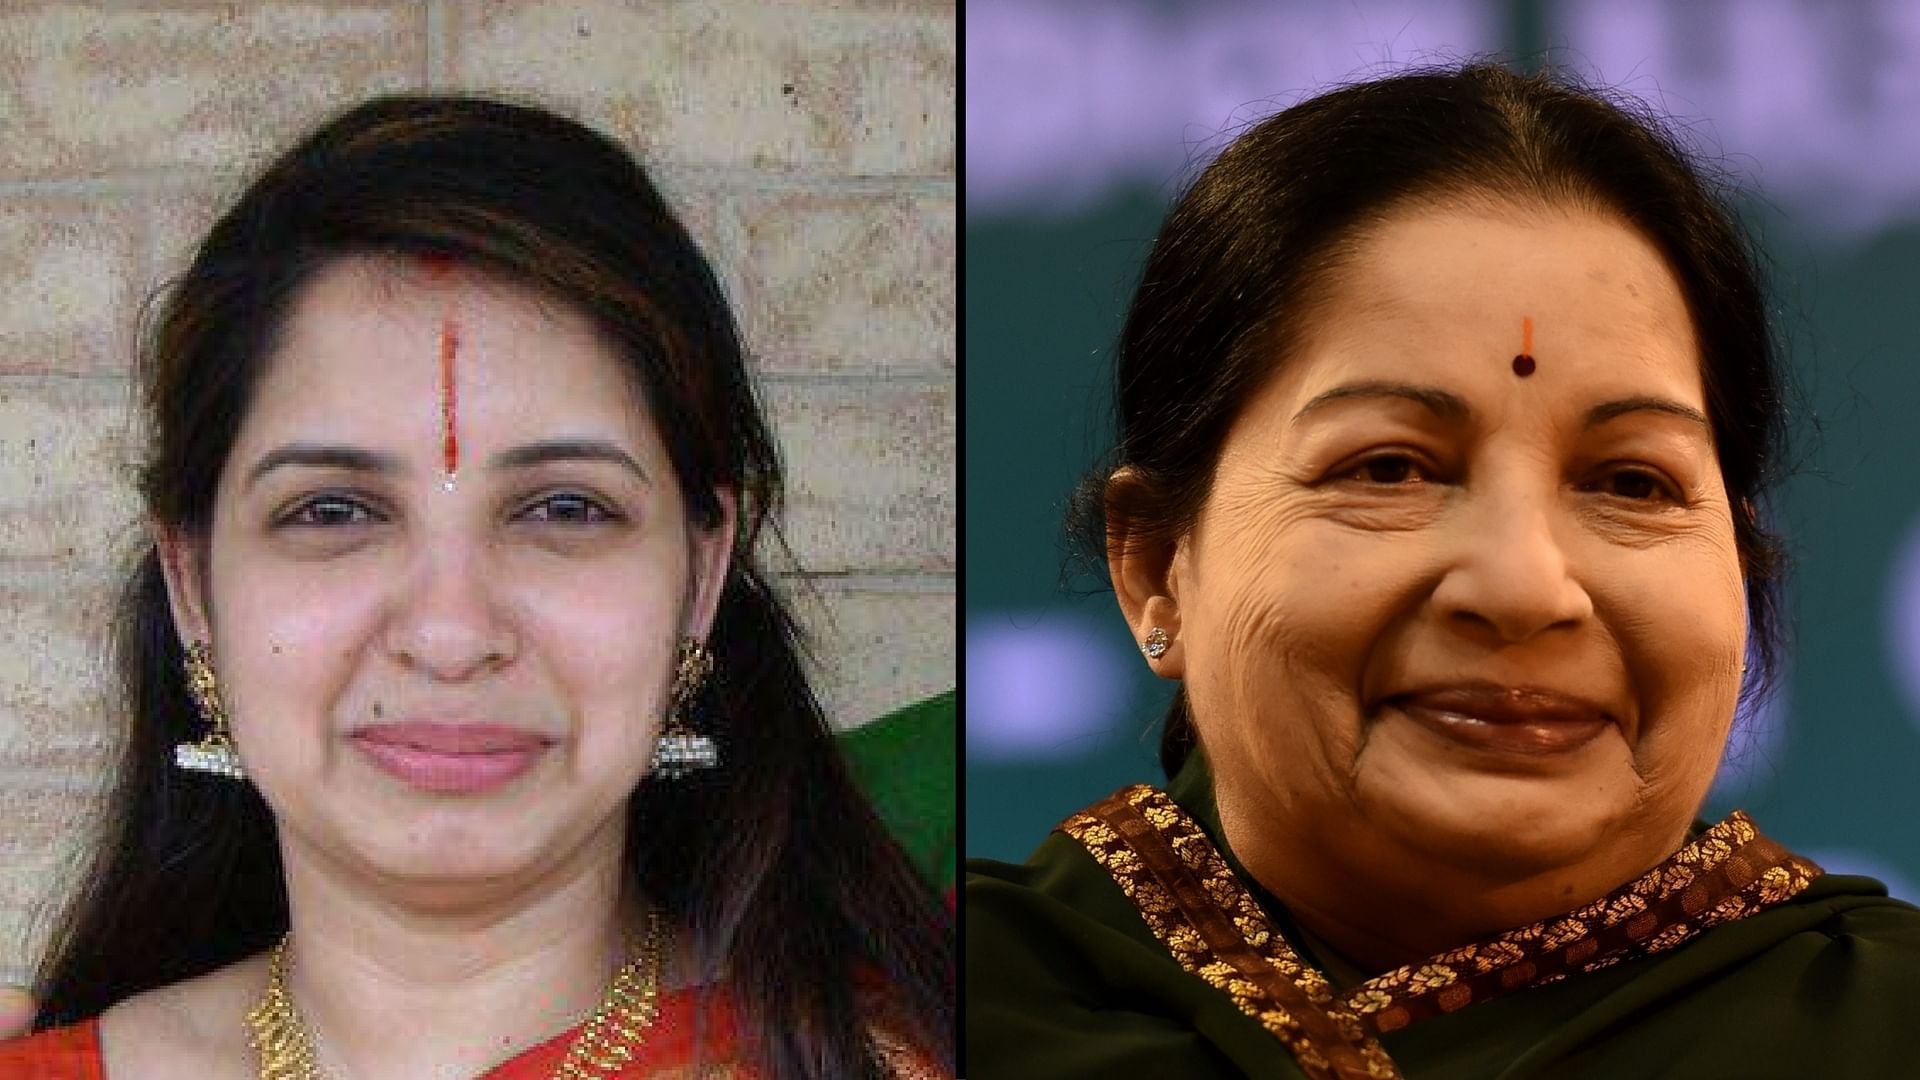 A photograph of Divya Ramanathan Veeraraghavan (left) went viral on social media claiming that she is late Tamil Nadu CM J Jayalalithaa’s daughter. (Photo Courtesy: The News Minute)